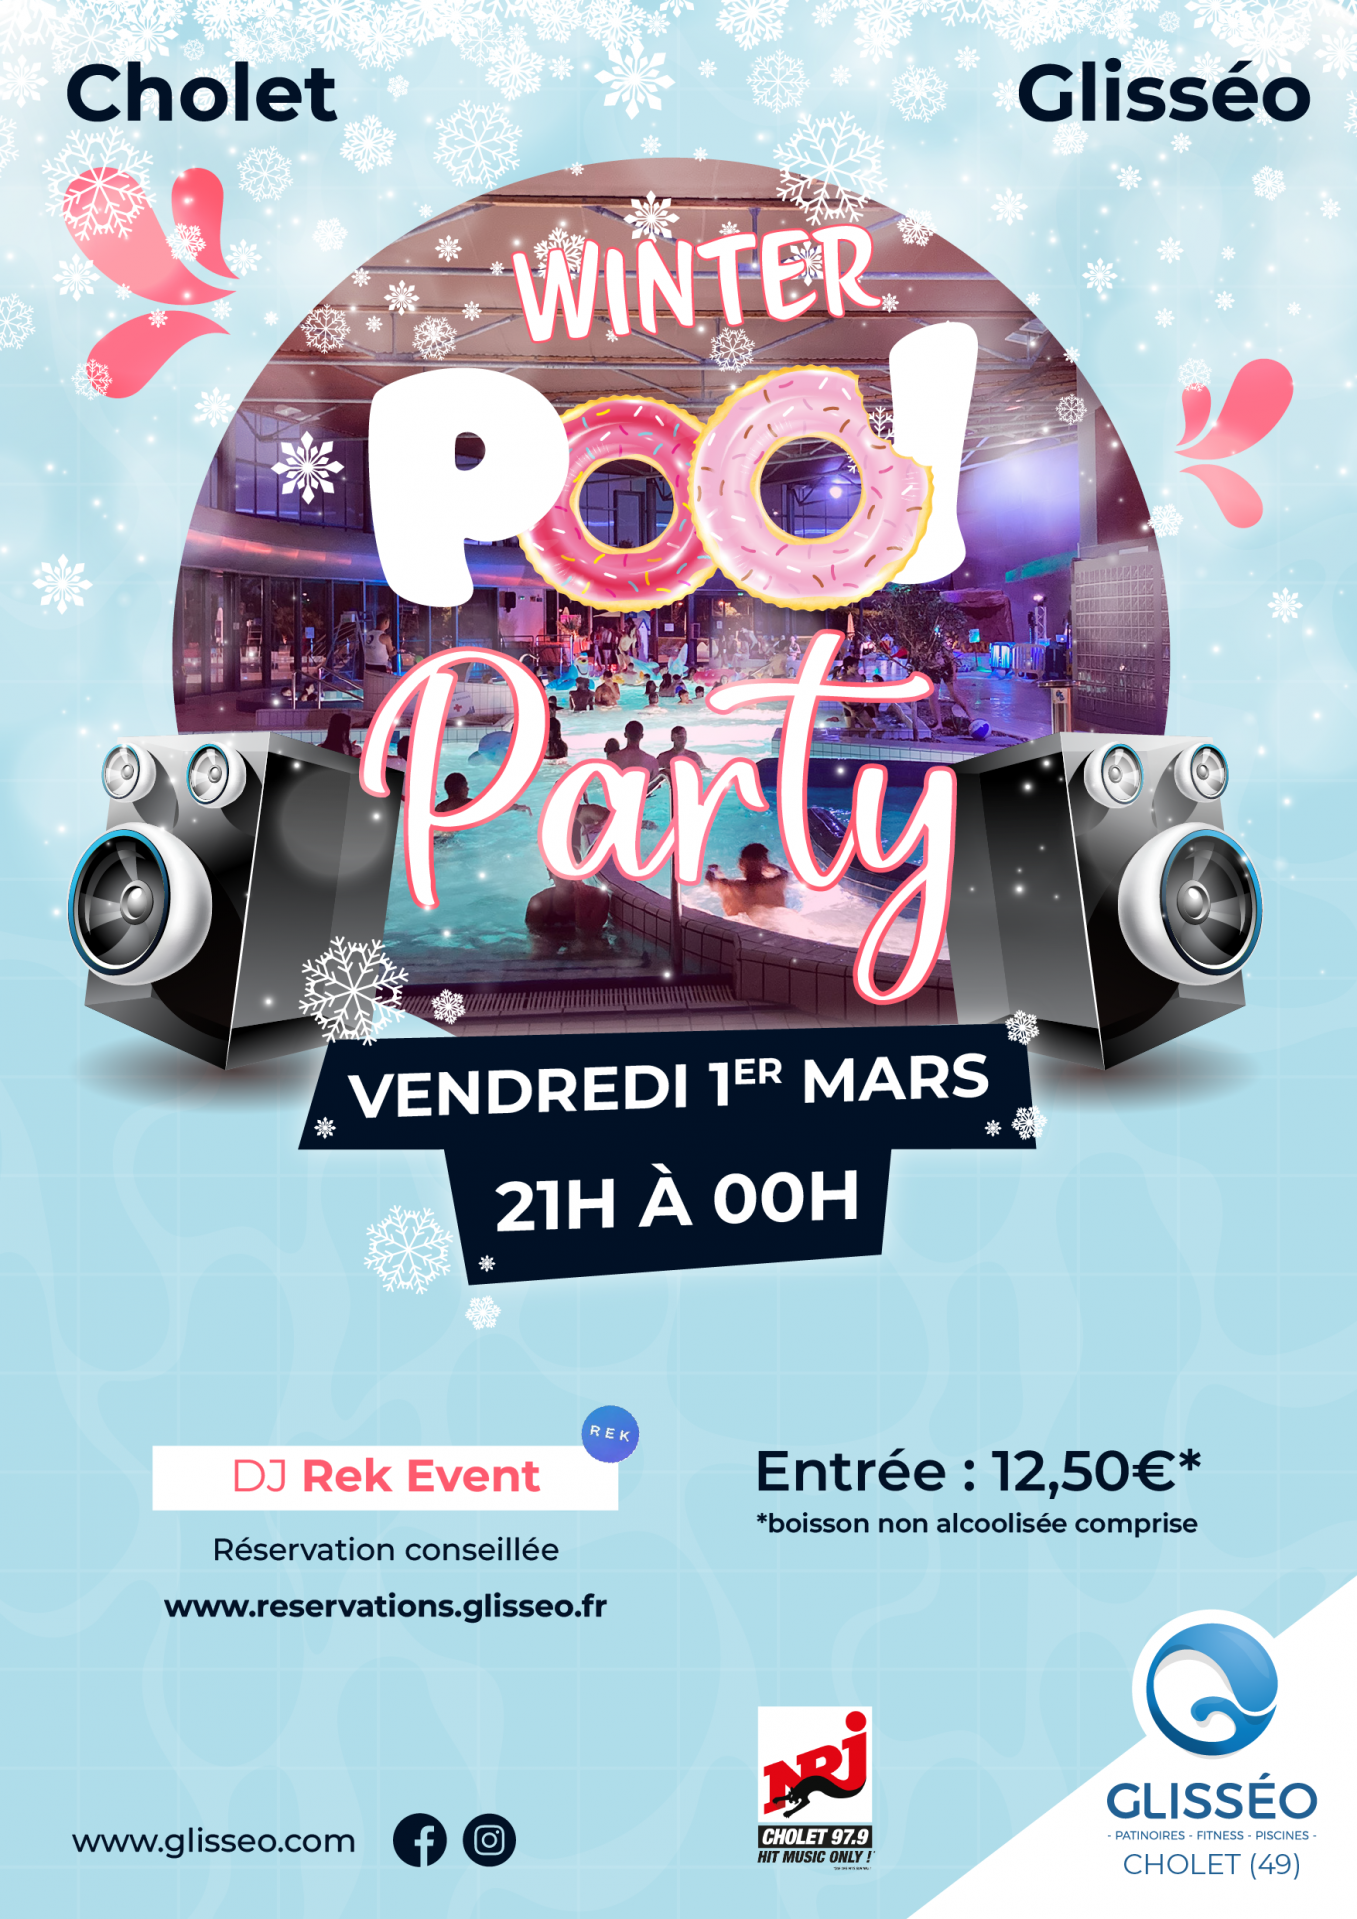 winter pool party glisseo cholet